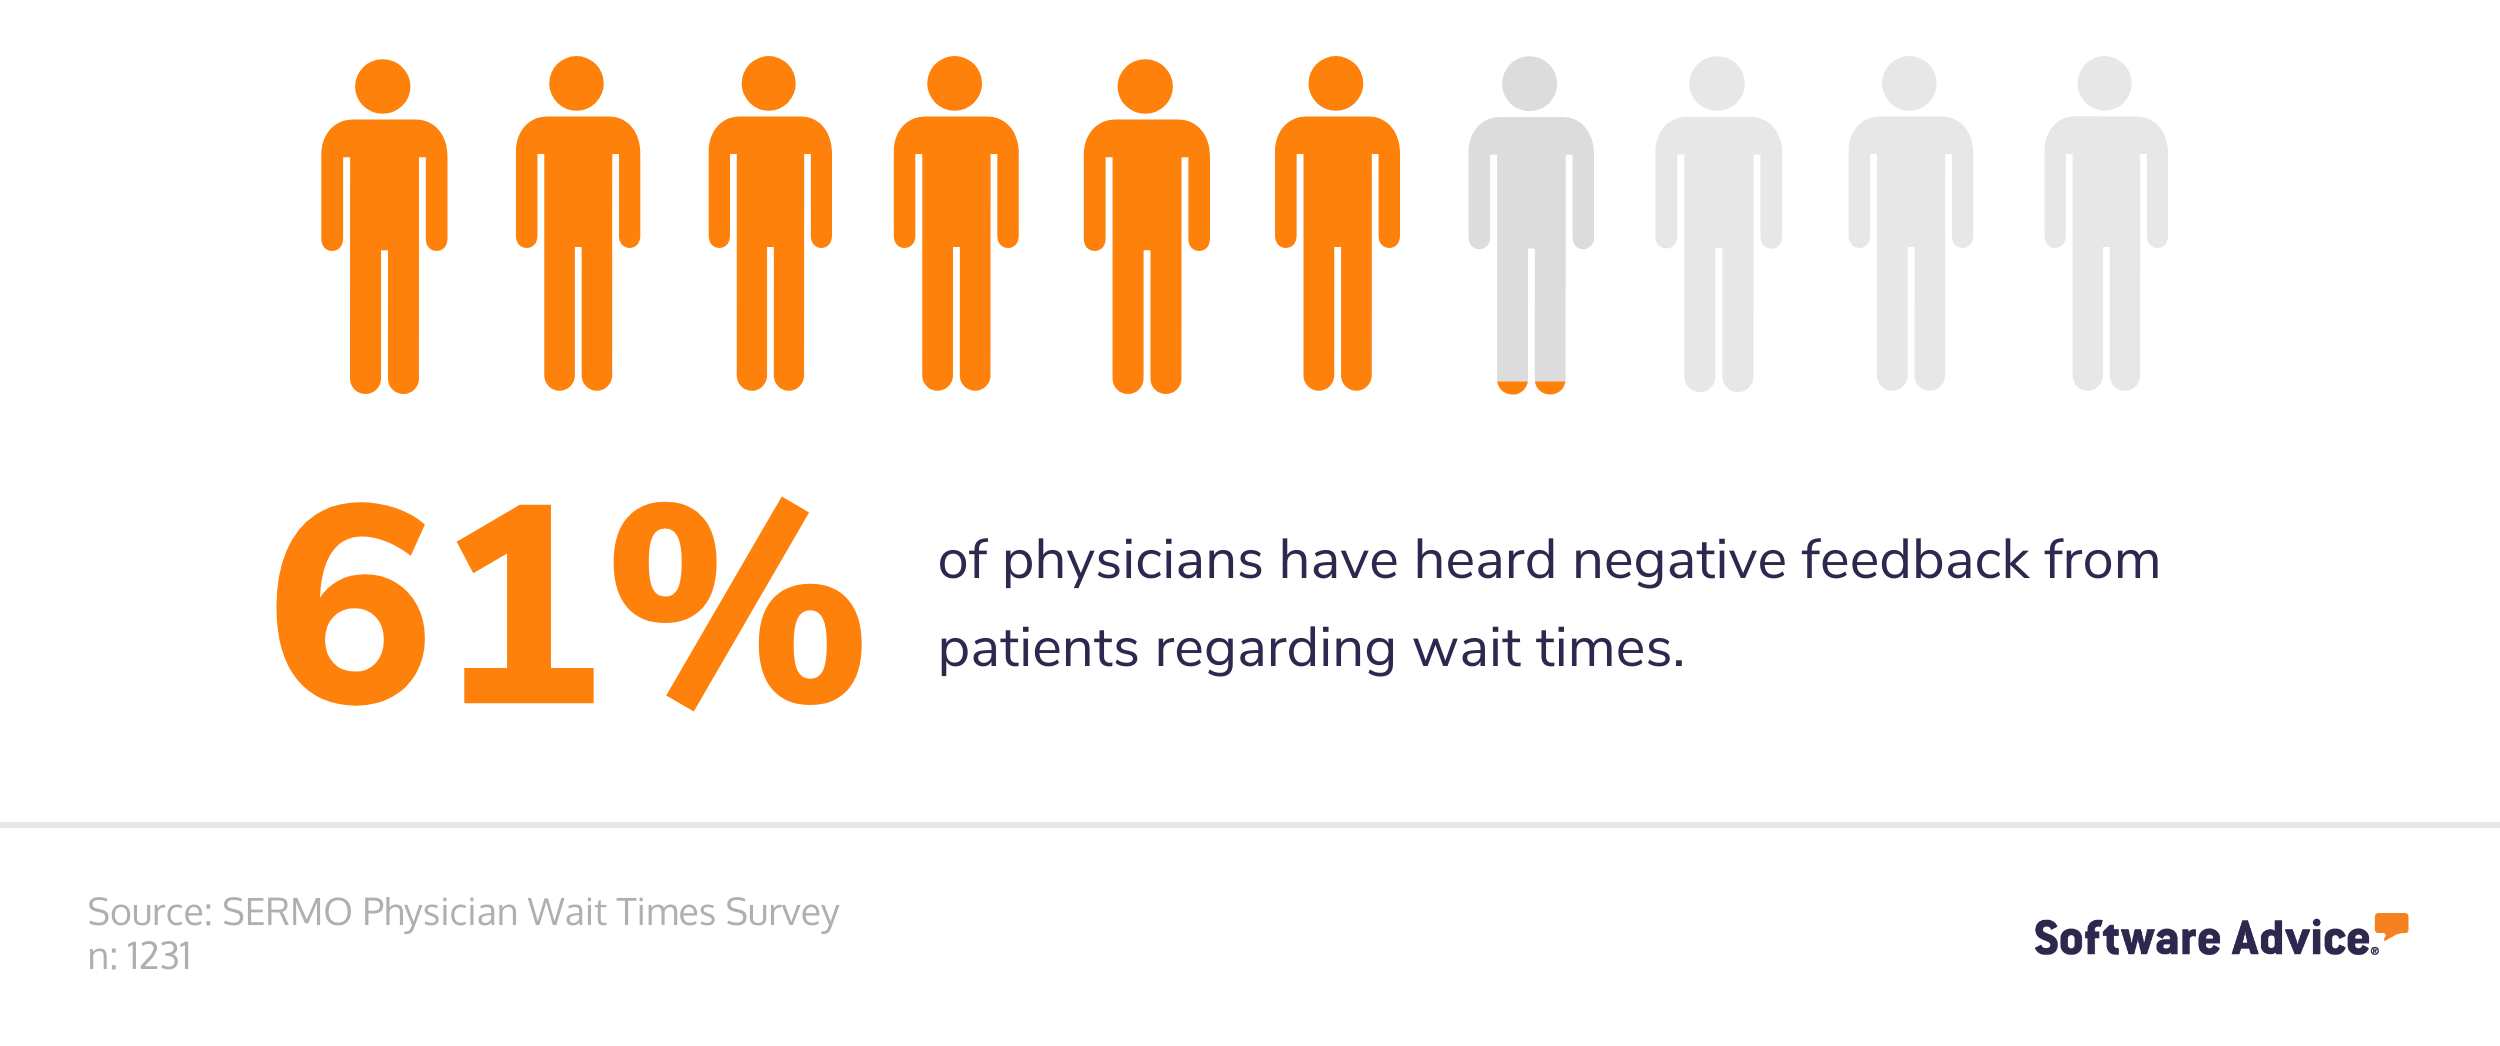 61%-of-physicians-have-had-negative-feedback-in-regards-to-wait-time